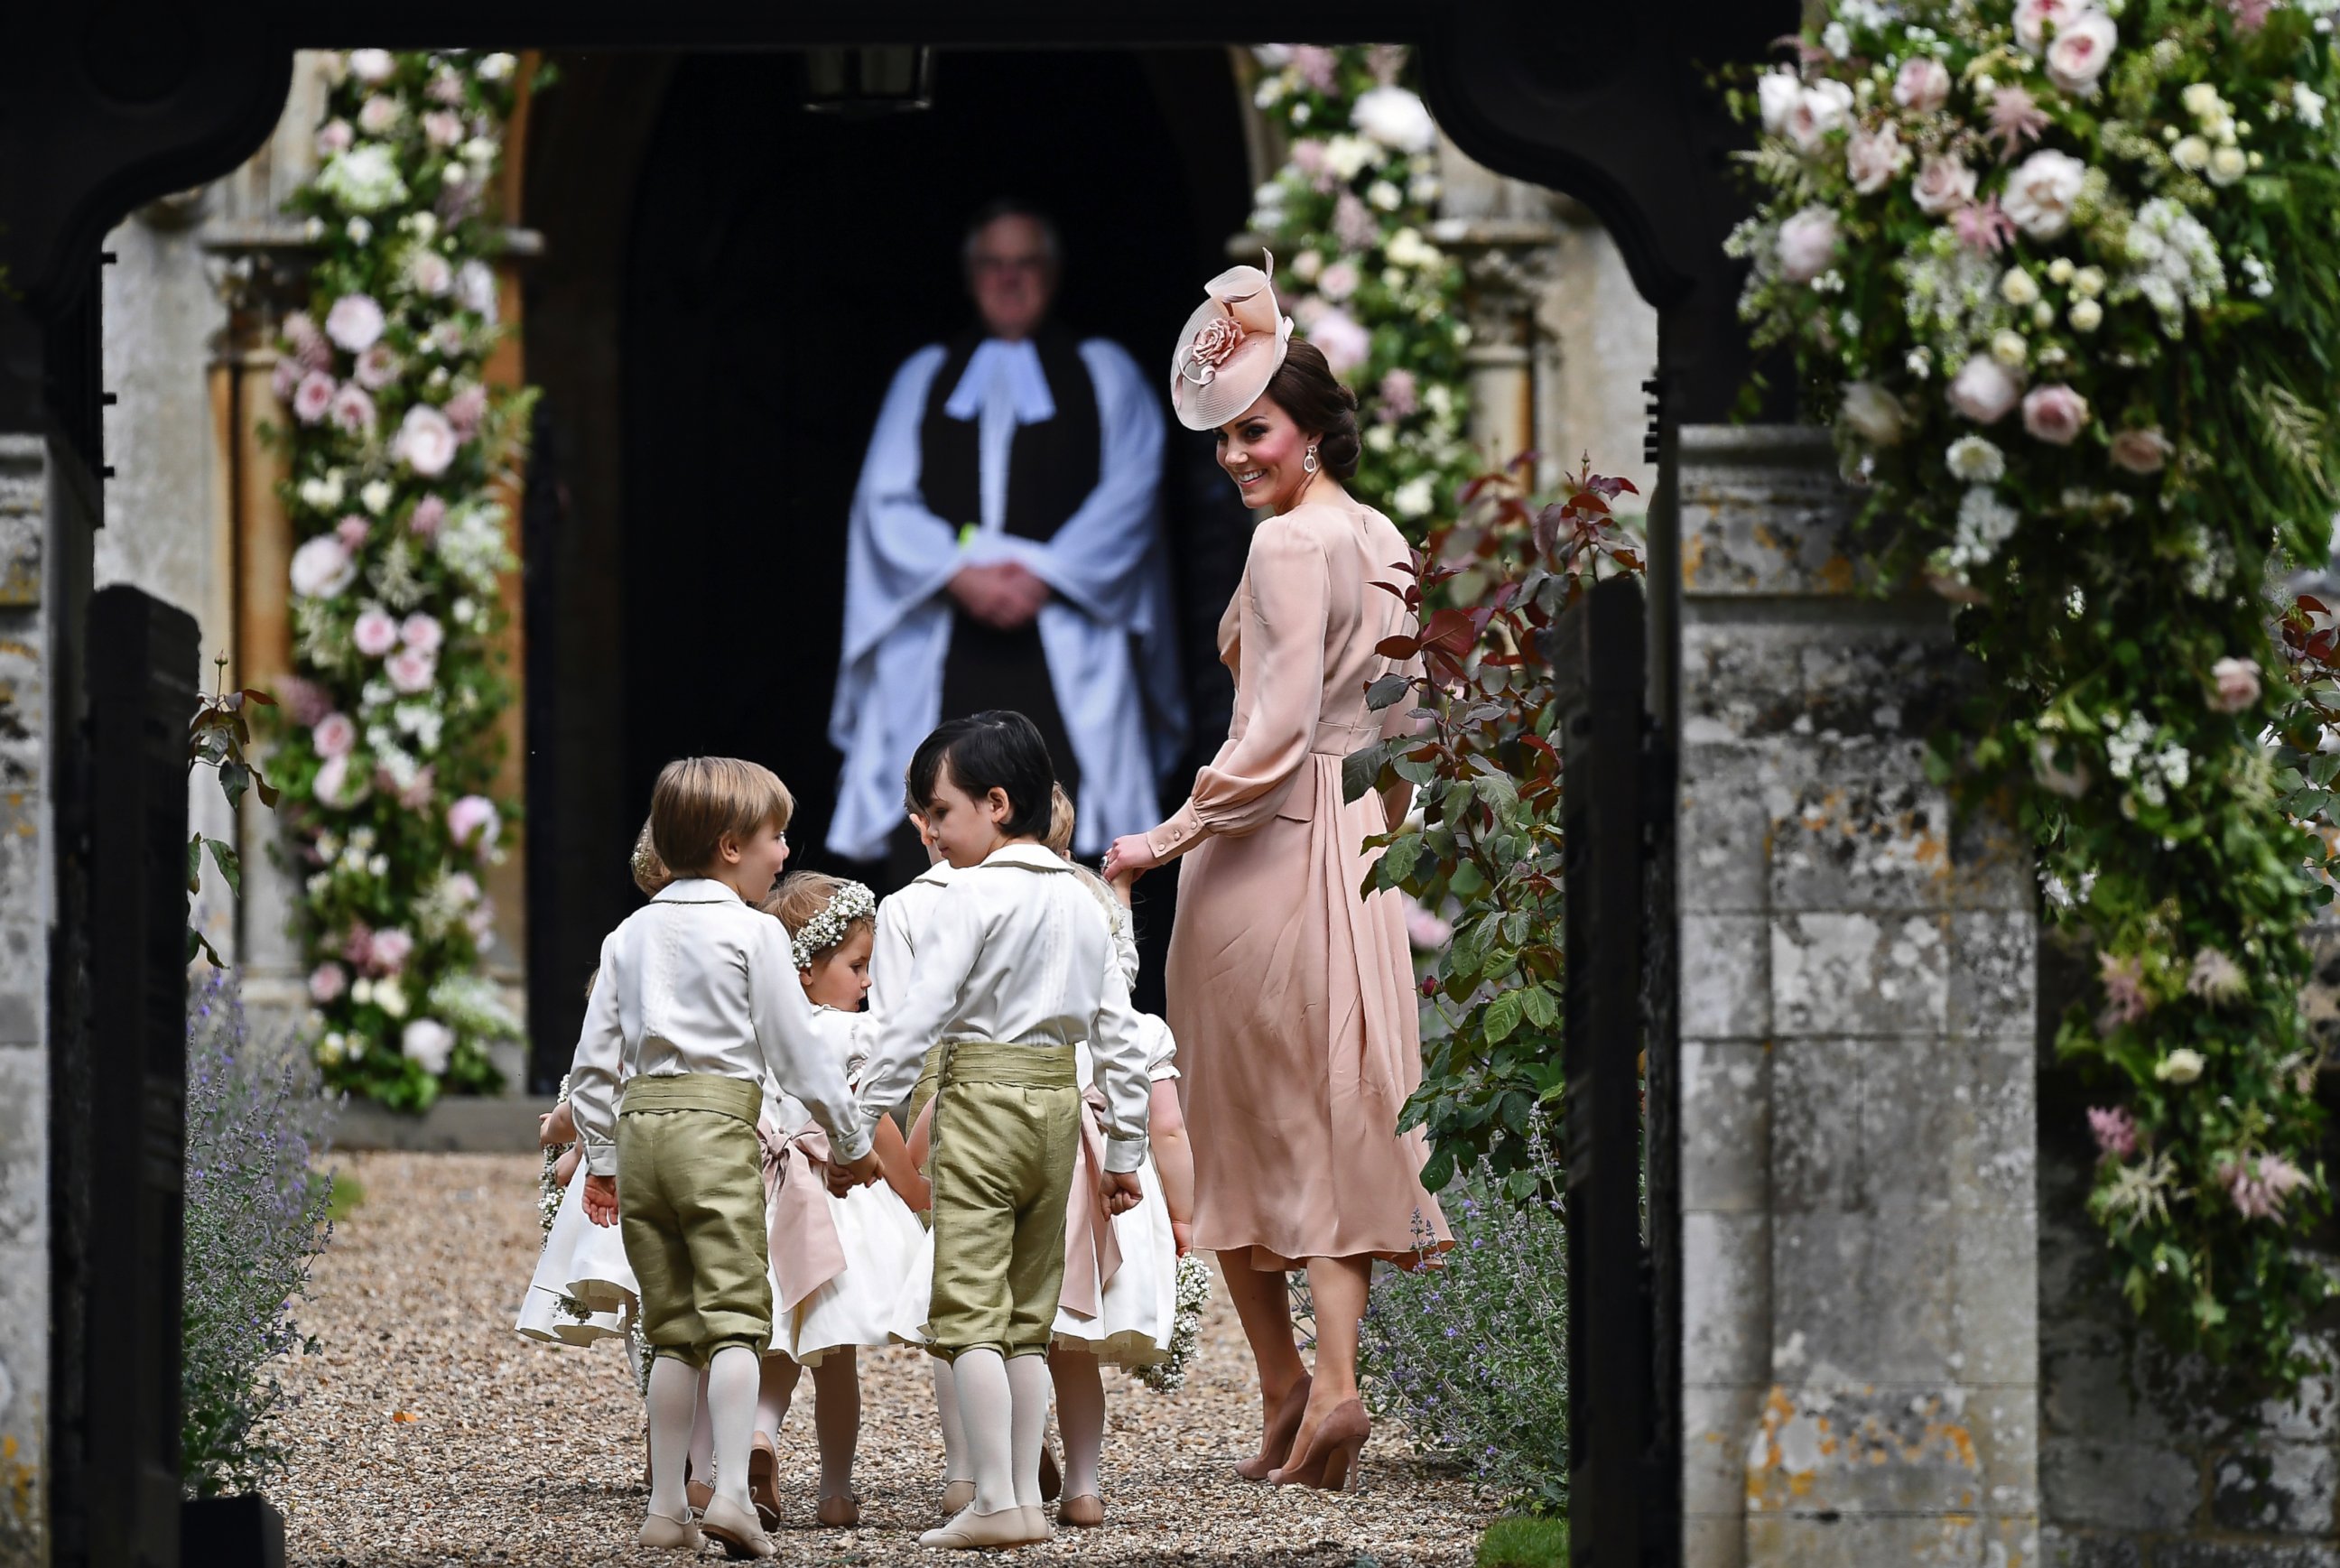 PHOTO: Catherine, Duchess of Cambridge, walks with the bridesmaids and pageboys as they arrive for her sister Pippa Middleton's wedding to James Matthews, at St Mark's Church in Englefield, England, May 20, 2017.